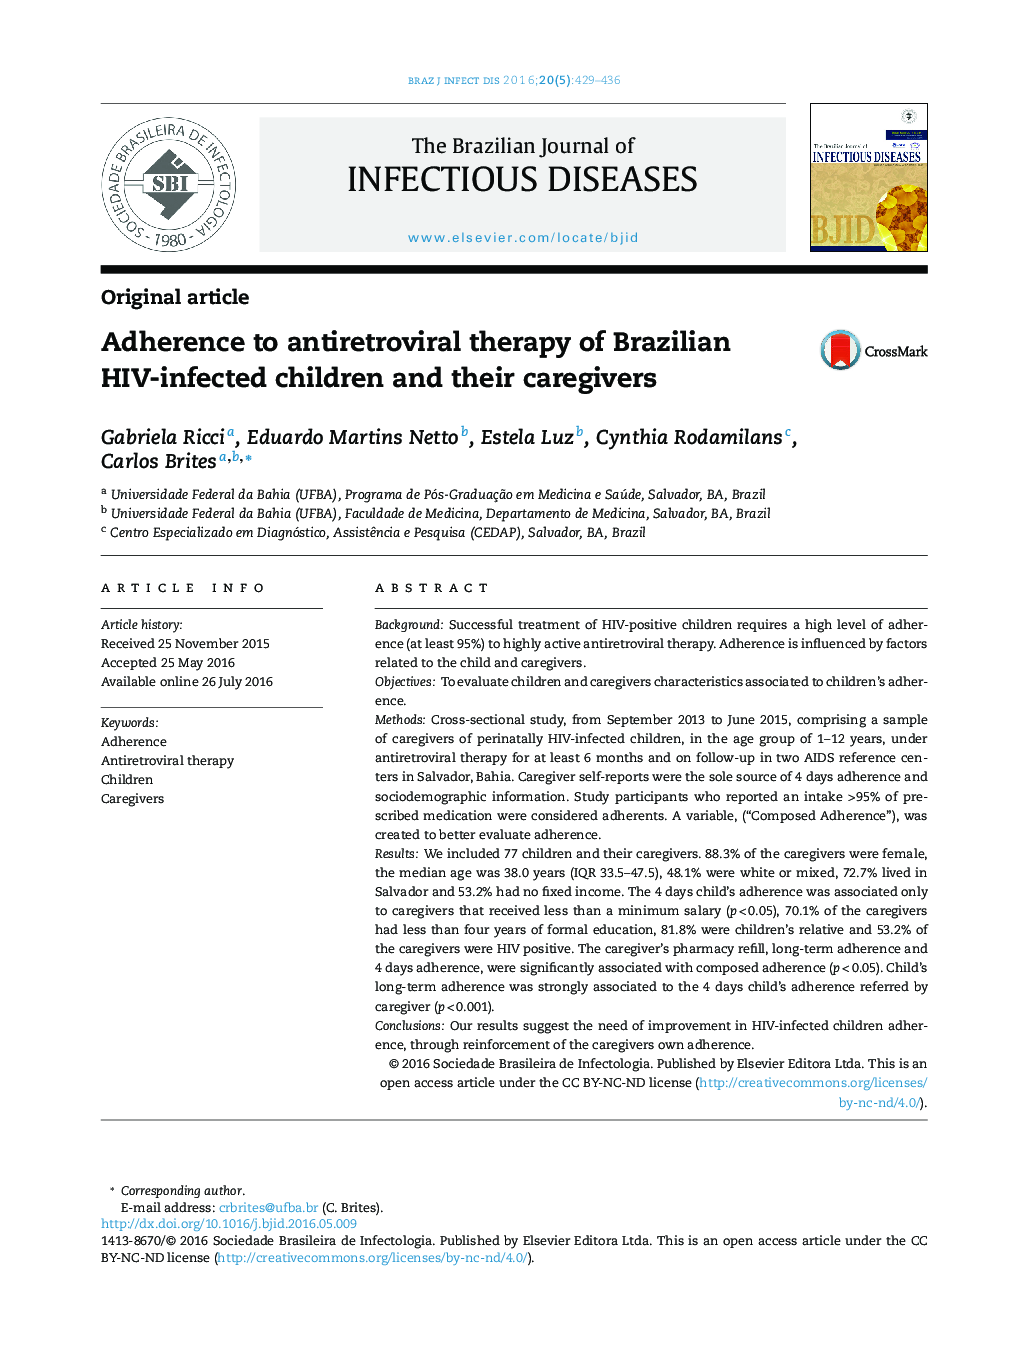 Adherence to antiretroviral therapy of Brazilian HIV-infected children and their caregivers